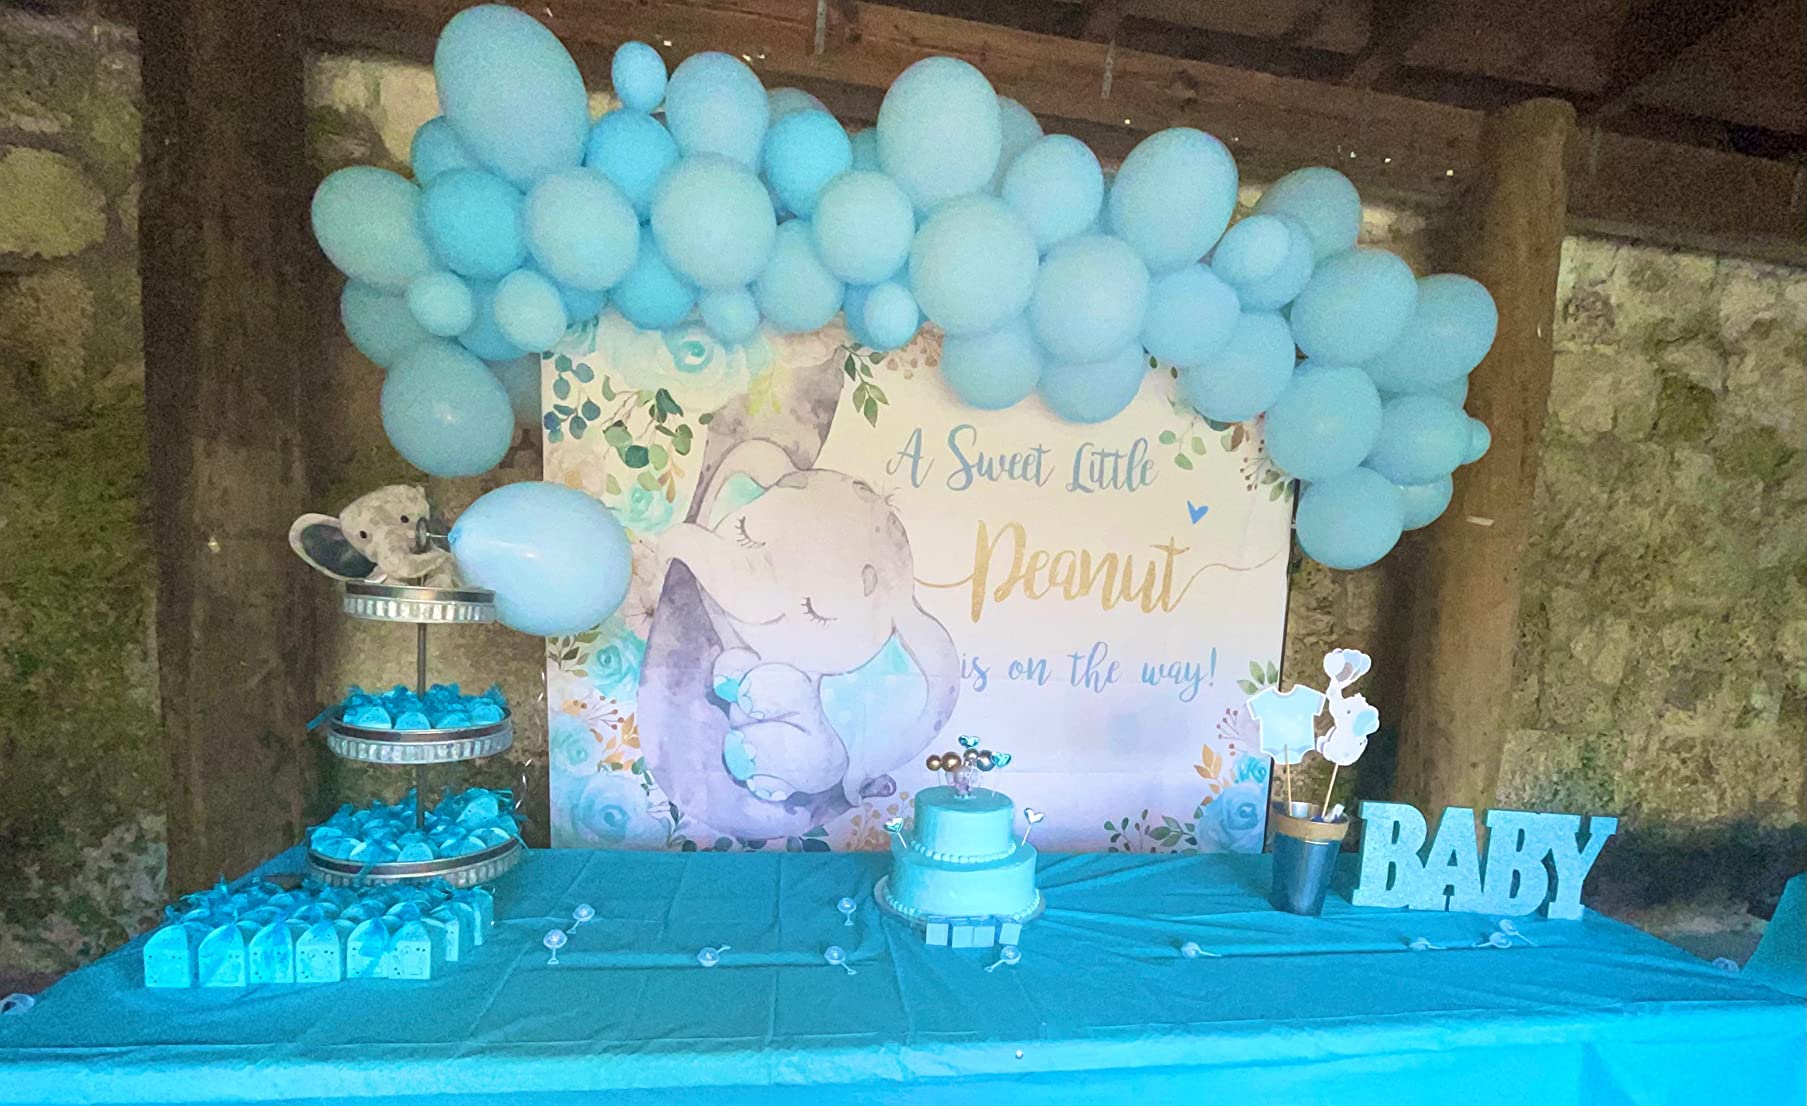 Avezano Elephant Baby Shower Backdrop Blue Floral Sweet Little Peanut is on The Way Elephant Baby Shower Party Decorations for Boys Elephant Baby Shower Party Cake Table Banner 7x5ft